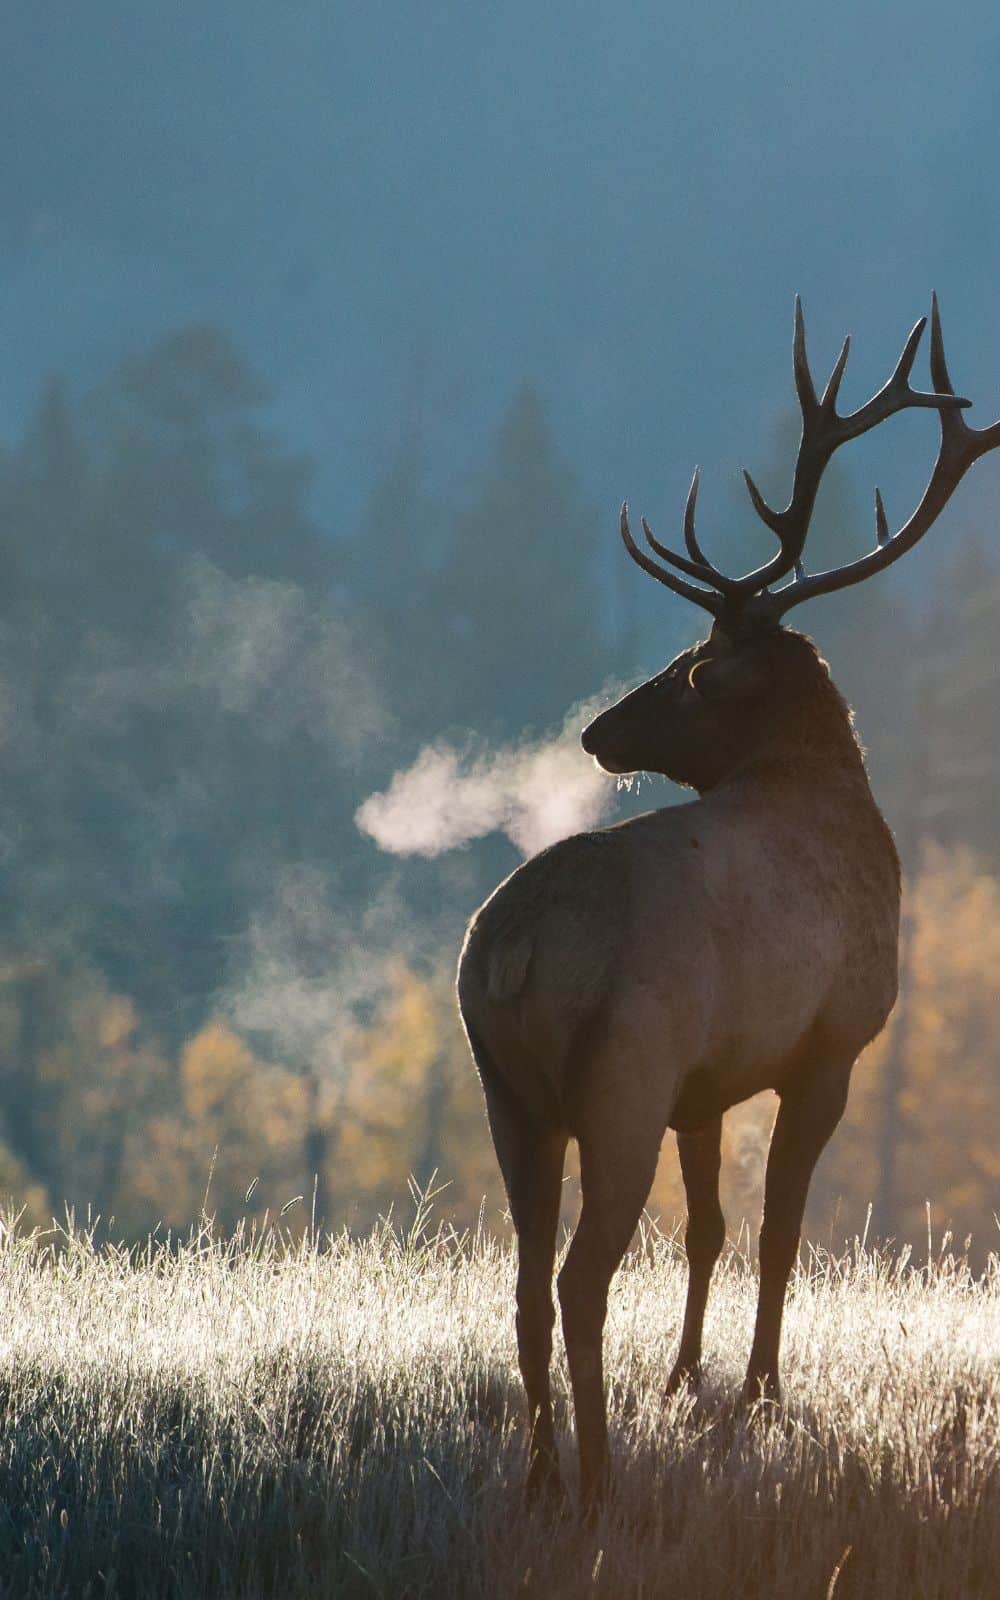 What are the characteristics of the elk